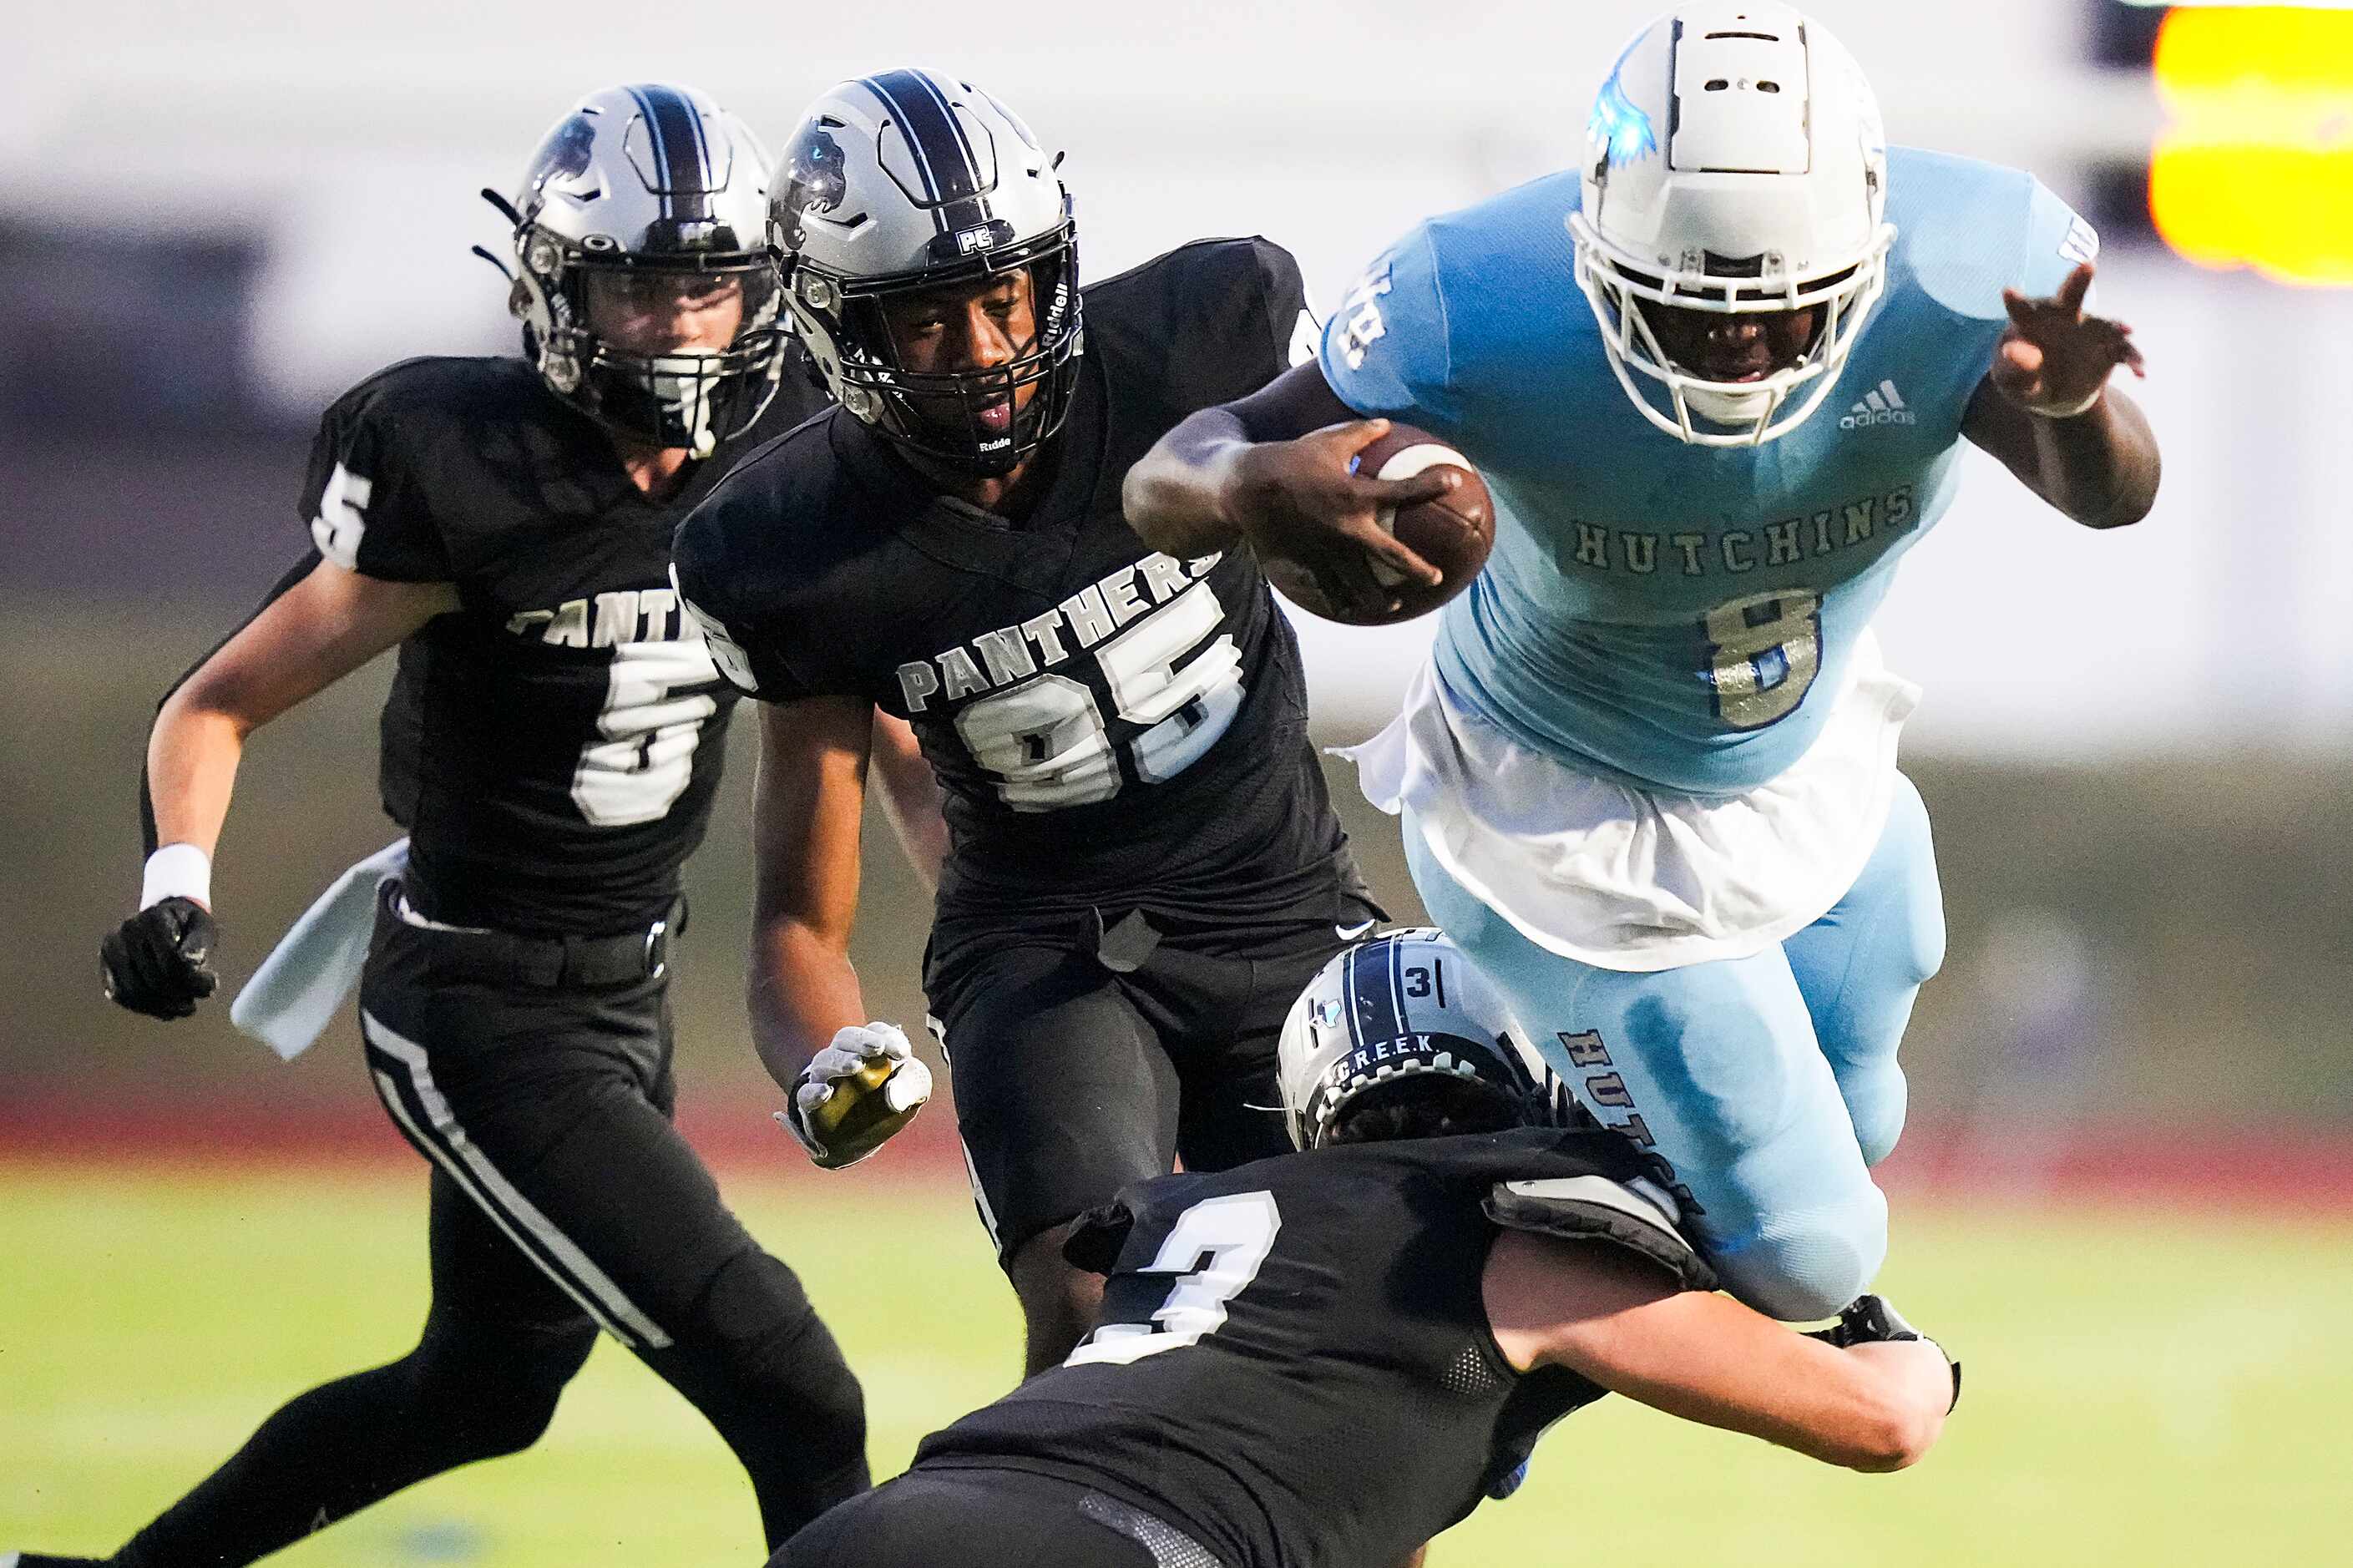 Wilmer-Hutchins running back Jacob Cummings (8) is brought down by Panther Creek’s Seth...